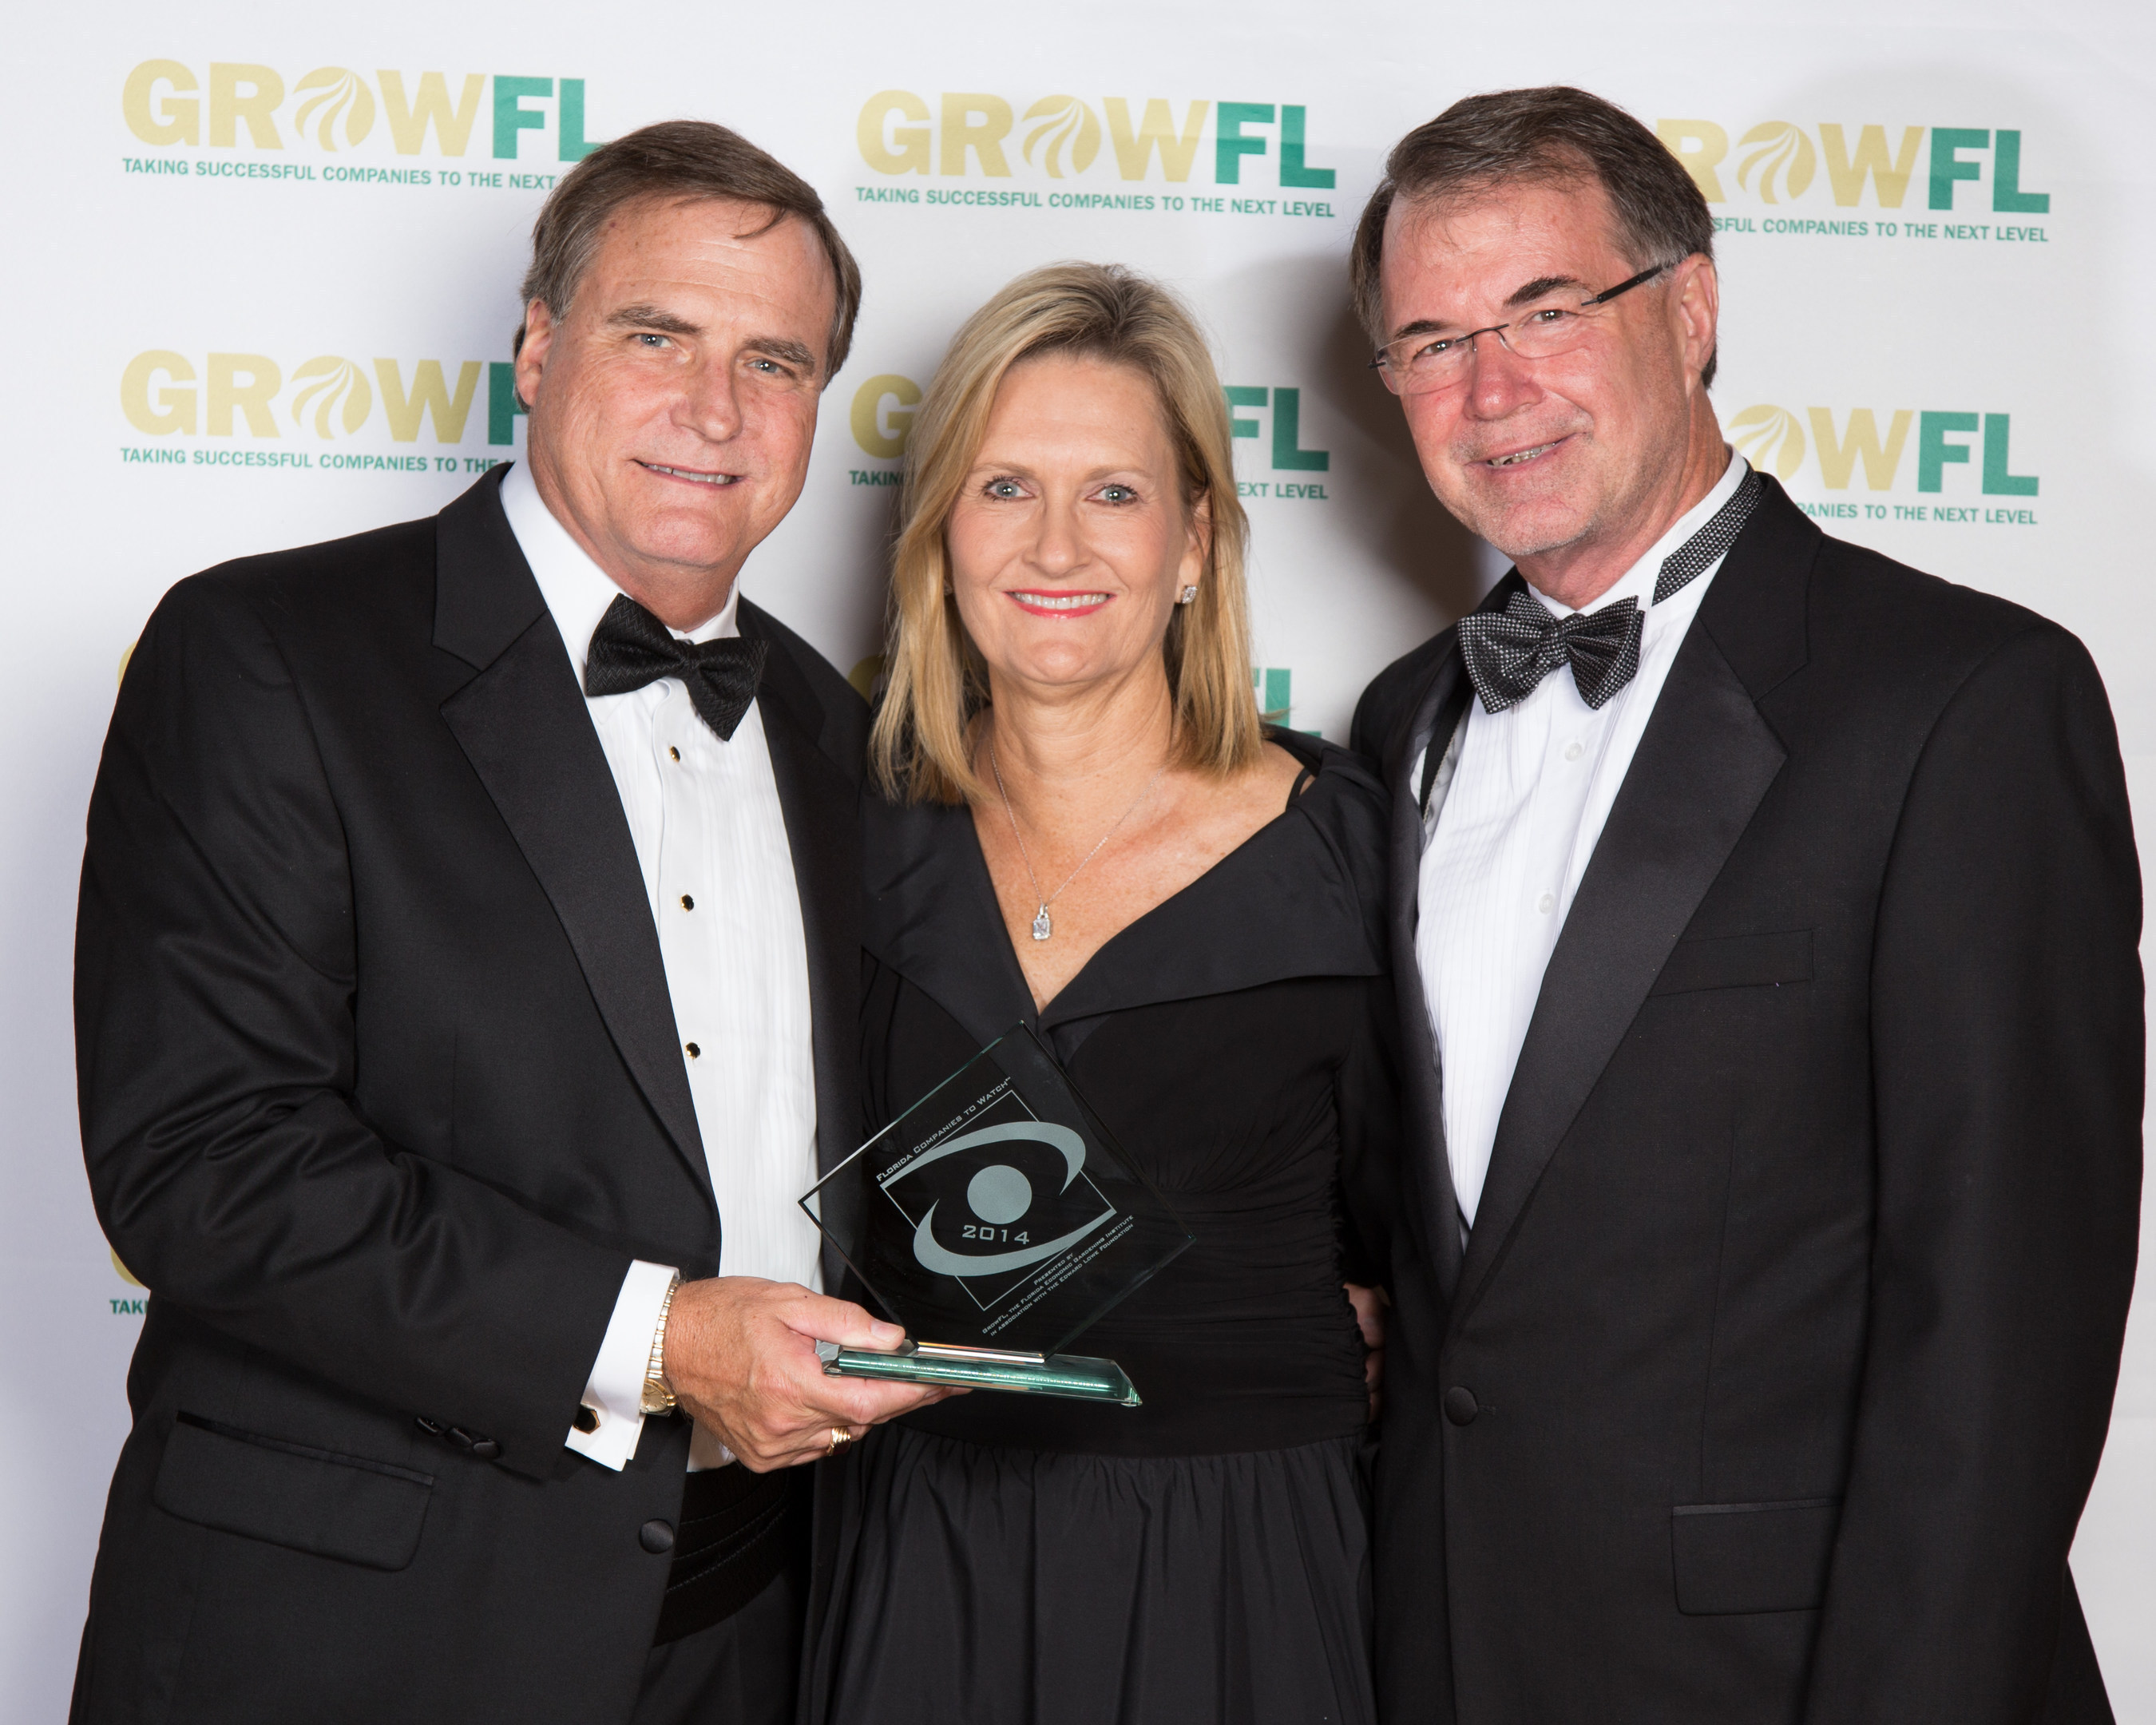 Employment Technologies founders Joseph and Eugenia Sefcik (left and center) proudly accept the Florida Companies to Watch Award from Dr. Tom O'Neal, Executive Director of GrowFL (right).